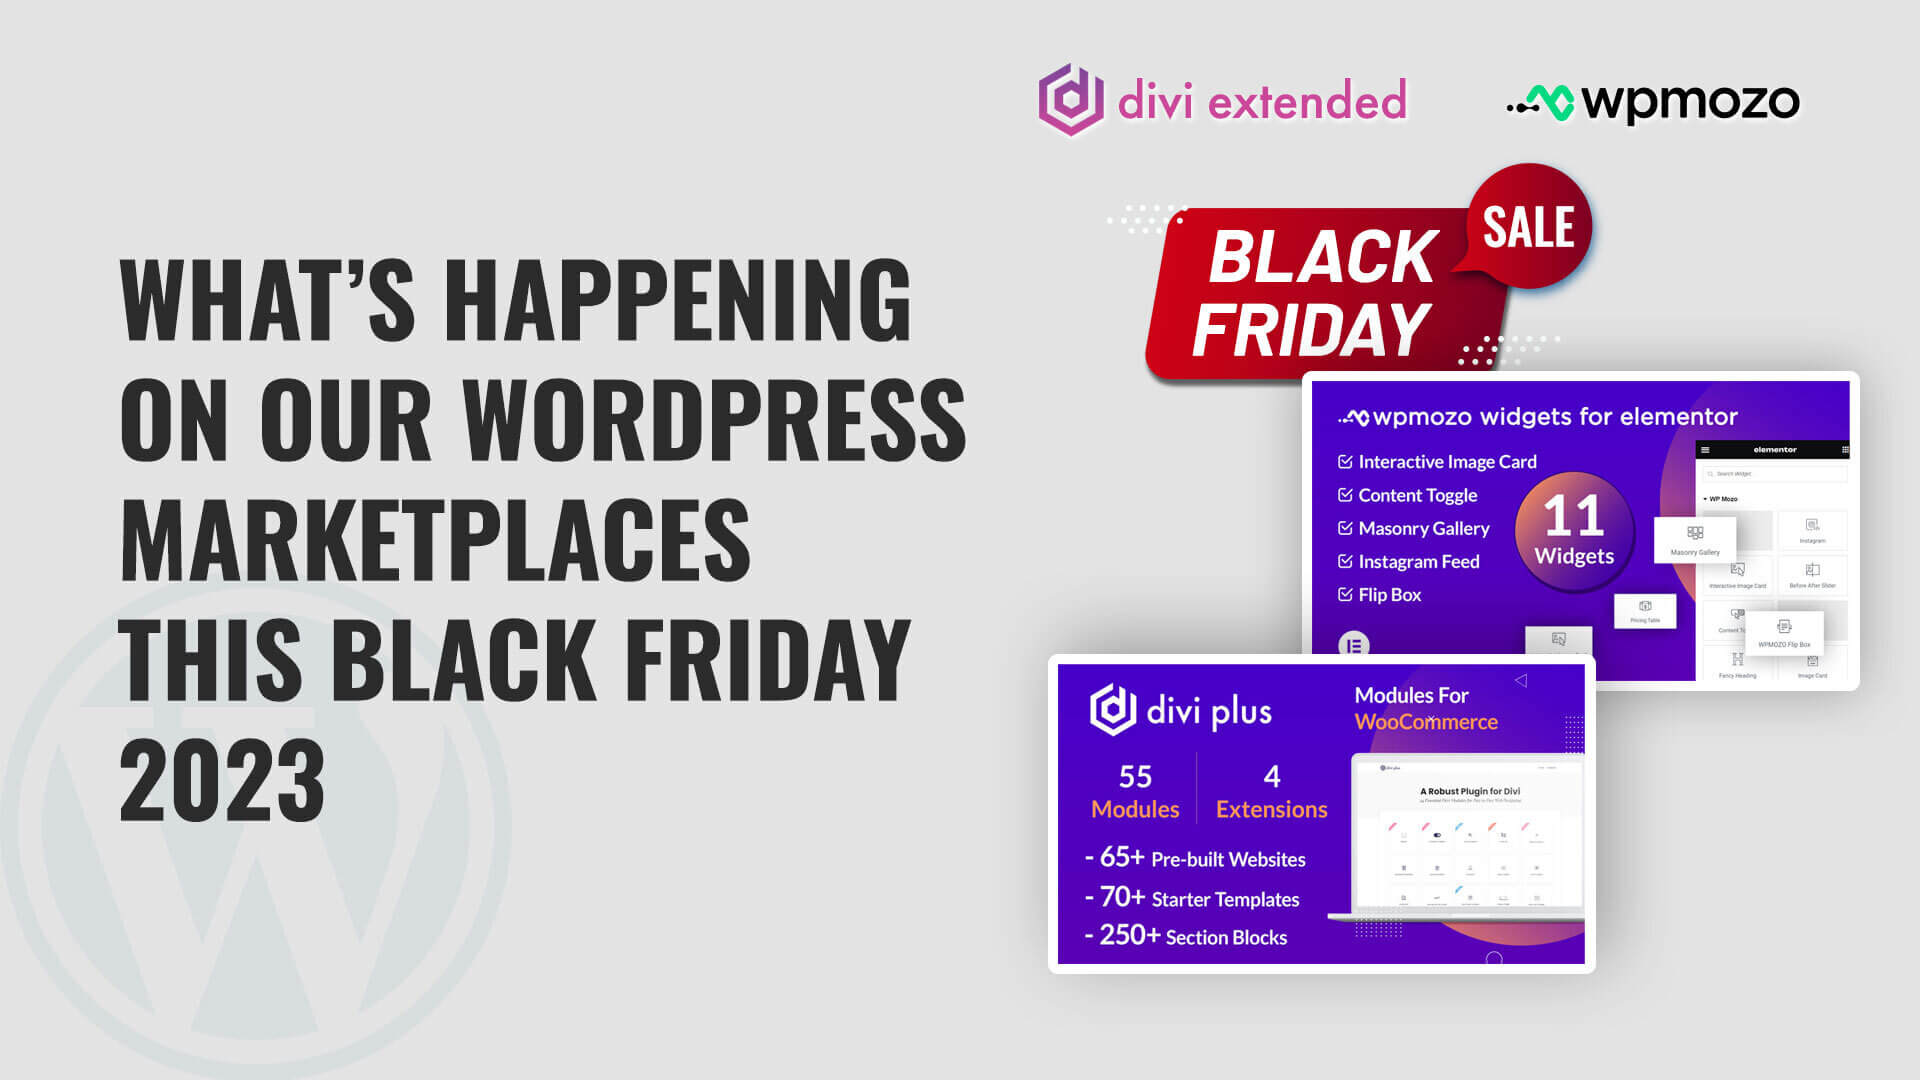 What’s Happening on Our WordPress Marketplaces This Black Friday 2023